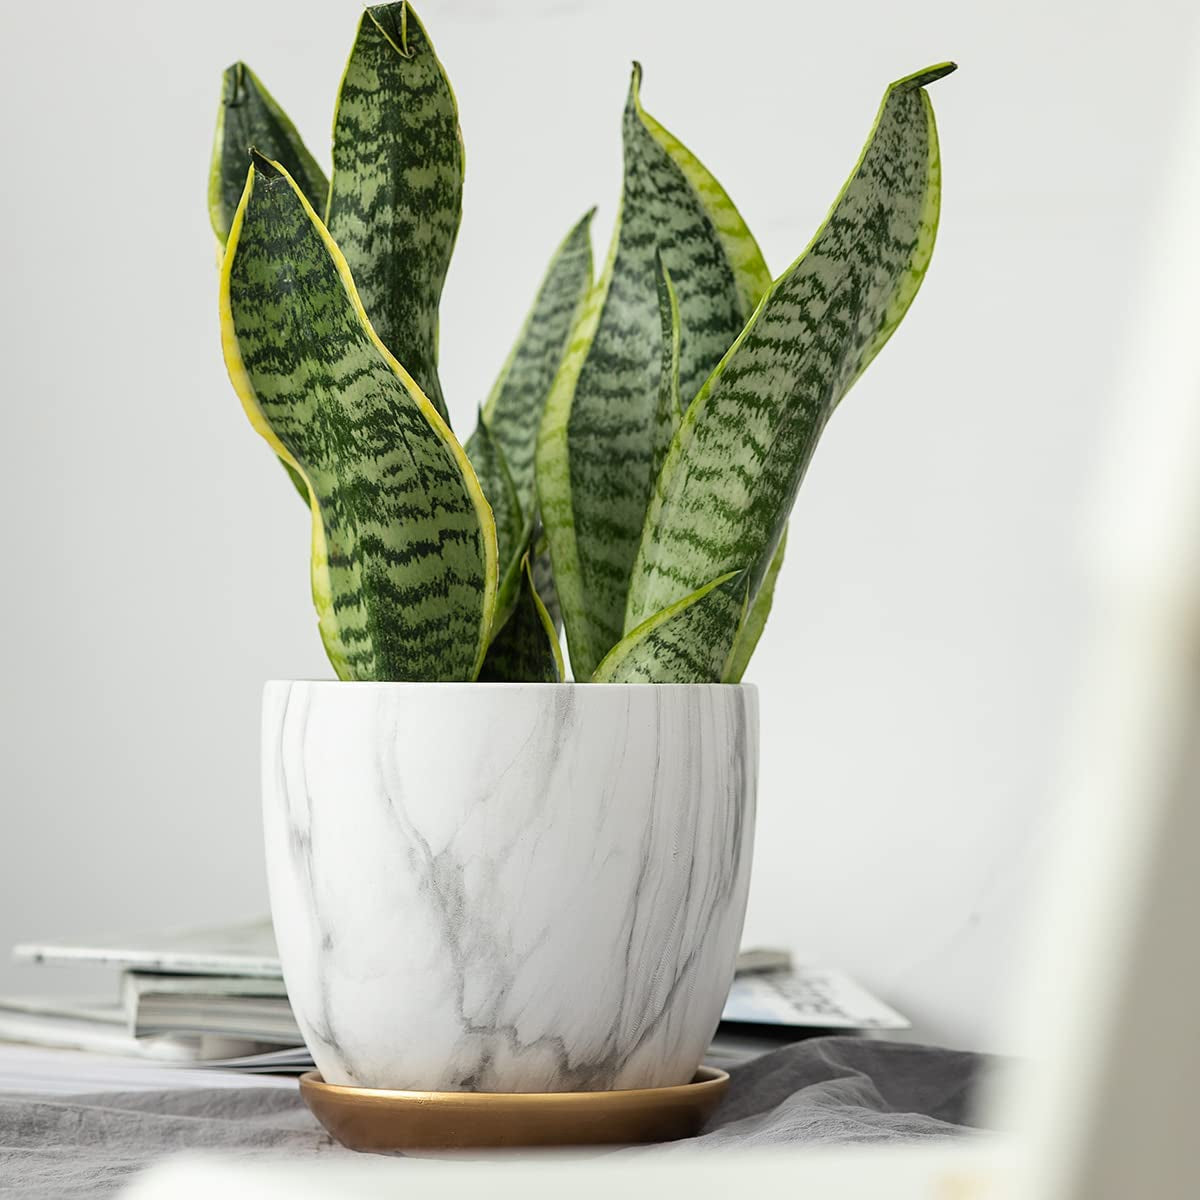 7 Inch Plant Pot with Drainage and Saucer, 5.5 Inch Ceramic Planters Indoor Plants, Marble Flower Pot Outdoor, Indoor Pots for Plants (7"+5.5" Plant Pot and Gold Saucers Included)